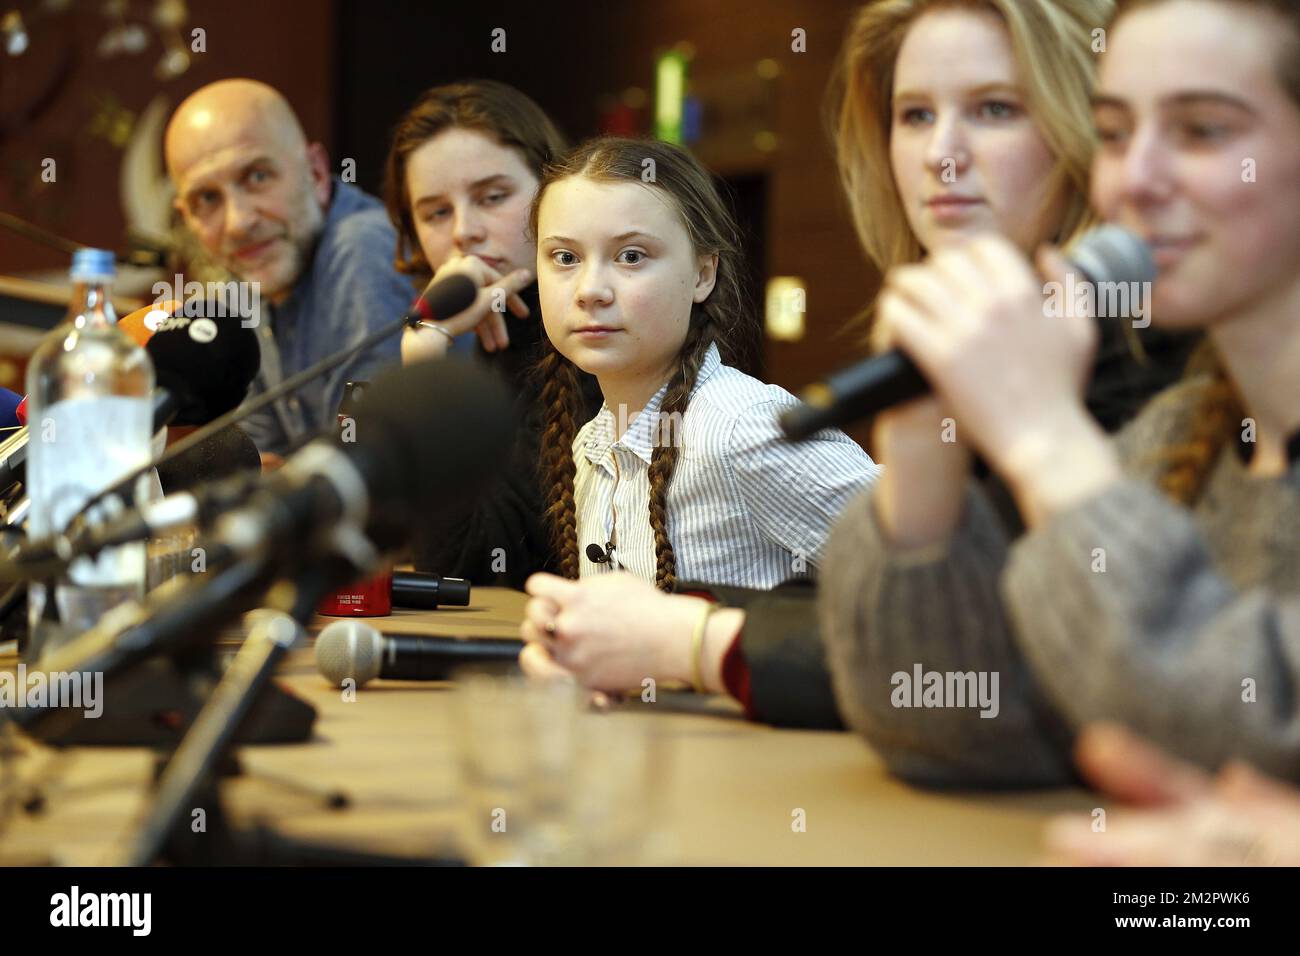 Nic Balthazar, Climate activist Anuna De Wever, Swedish climate activist Greta Thunberg, Climate activist Kyra Gantois and Climate activist Adelaide Charlier pictured during a press conference following a student strike action, organized by 'Youth For Climate', urging pupils to skip classes to protest a lack of climate awareness, Thursday 21 February 2019 in Brussels. This marks the seventh consecutive week youths take the streets on Thursday. The action is inspired by the 'School Strike' of Swedish 15-year-old Greta, joining the protests in Brussels today. BELGA PHOTO NICOLAS MAETERLINCK  Stock Photo